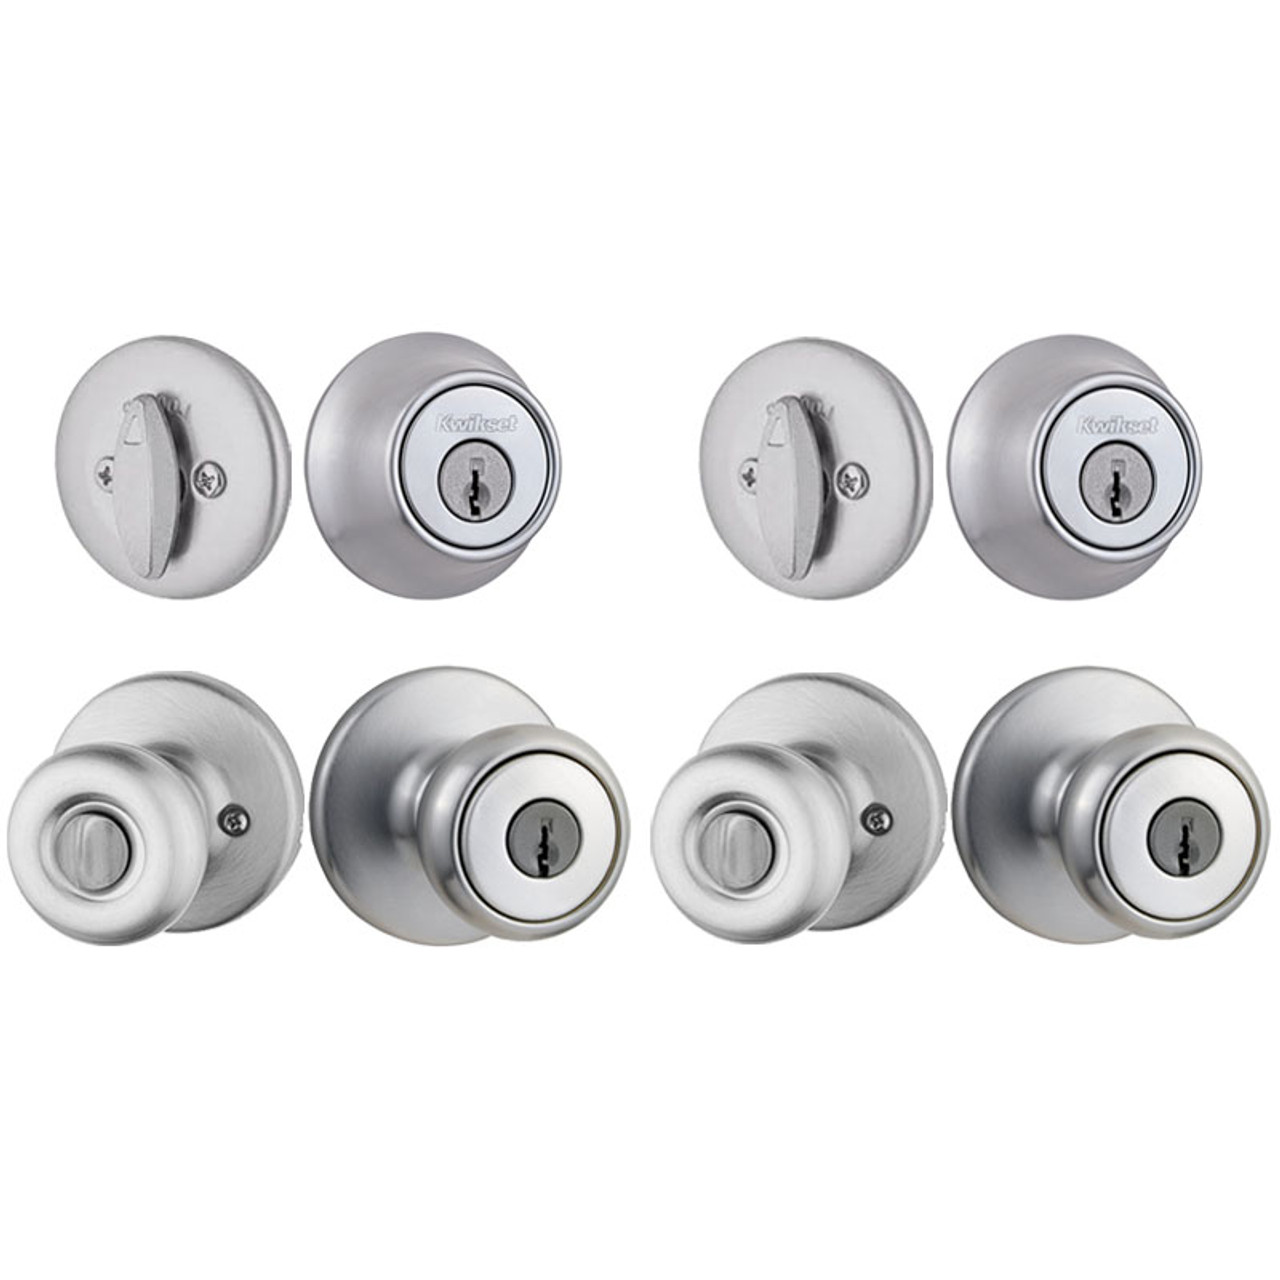 Kwikset 695 Tylo Entry Knob and Double Cylinder Deadbolt Combo Pack in Satin Chrome by Kwikset - 2